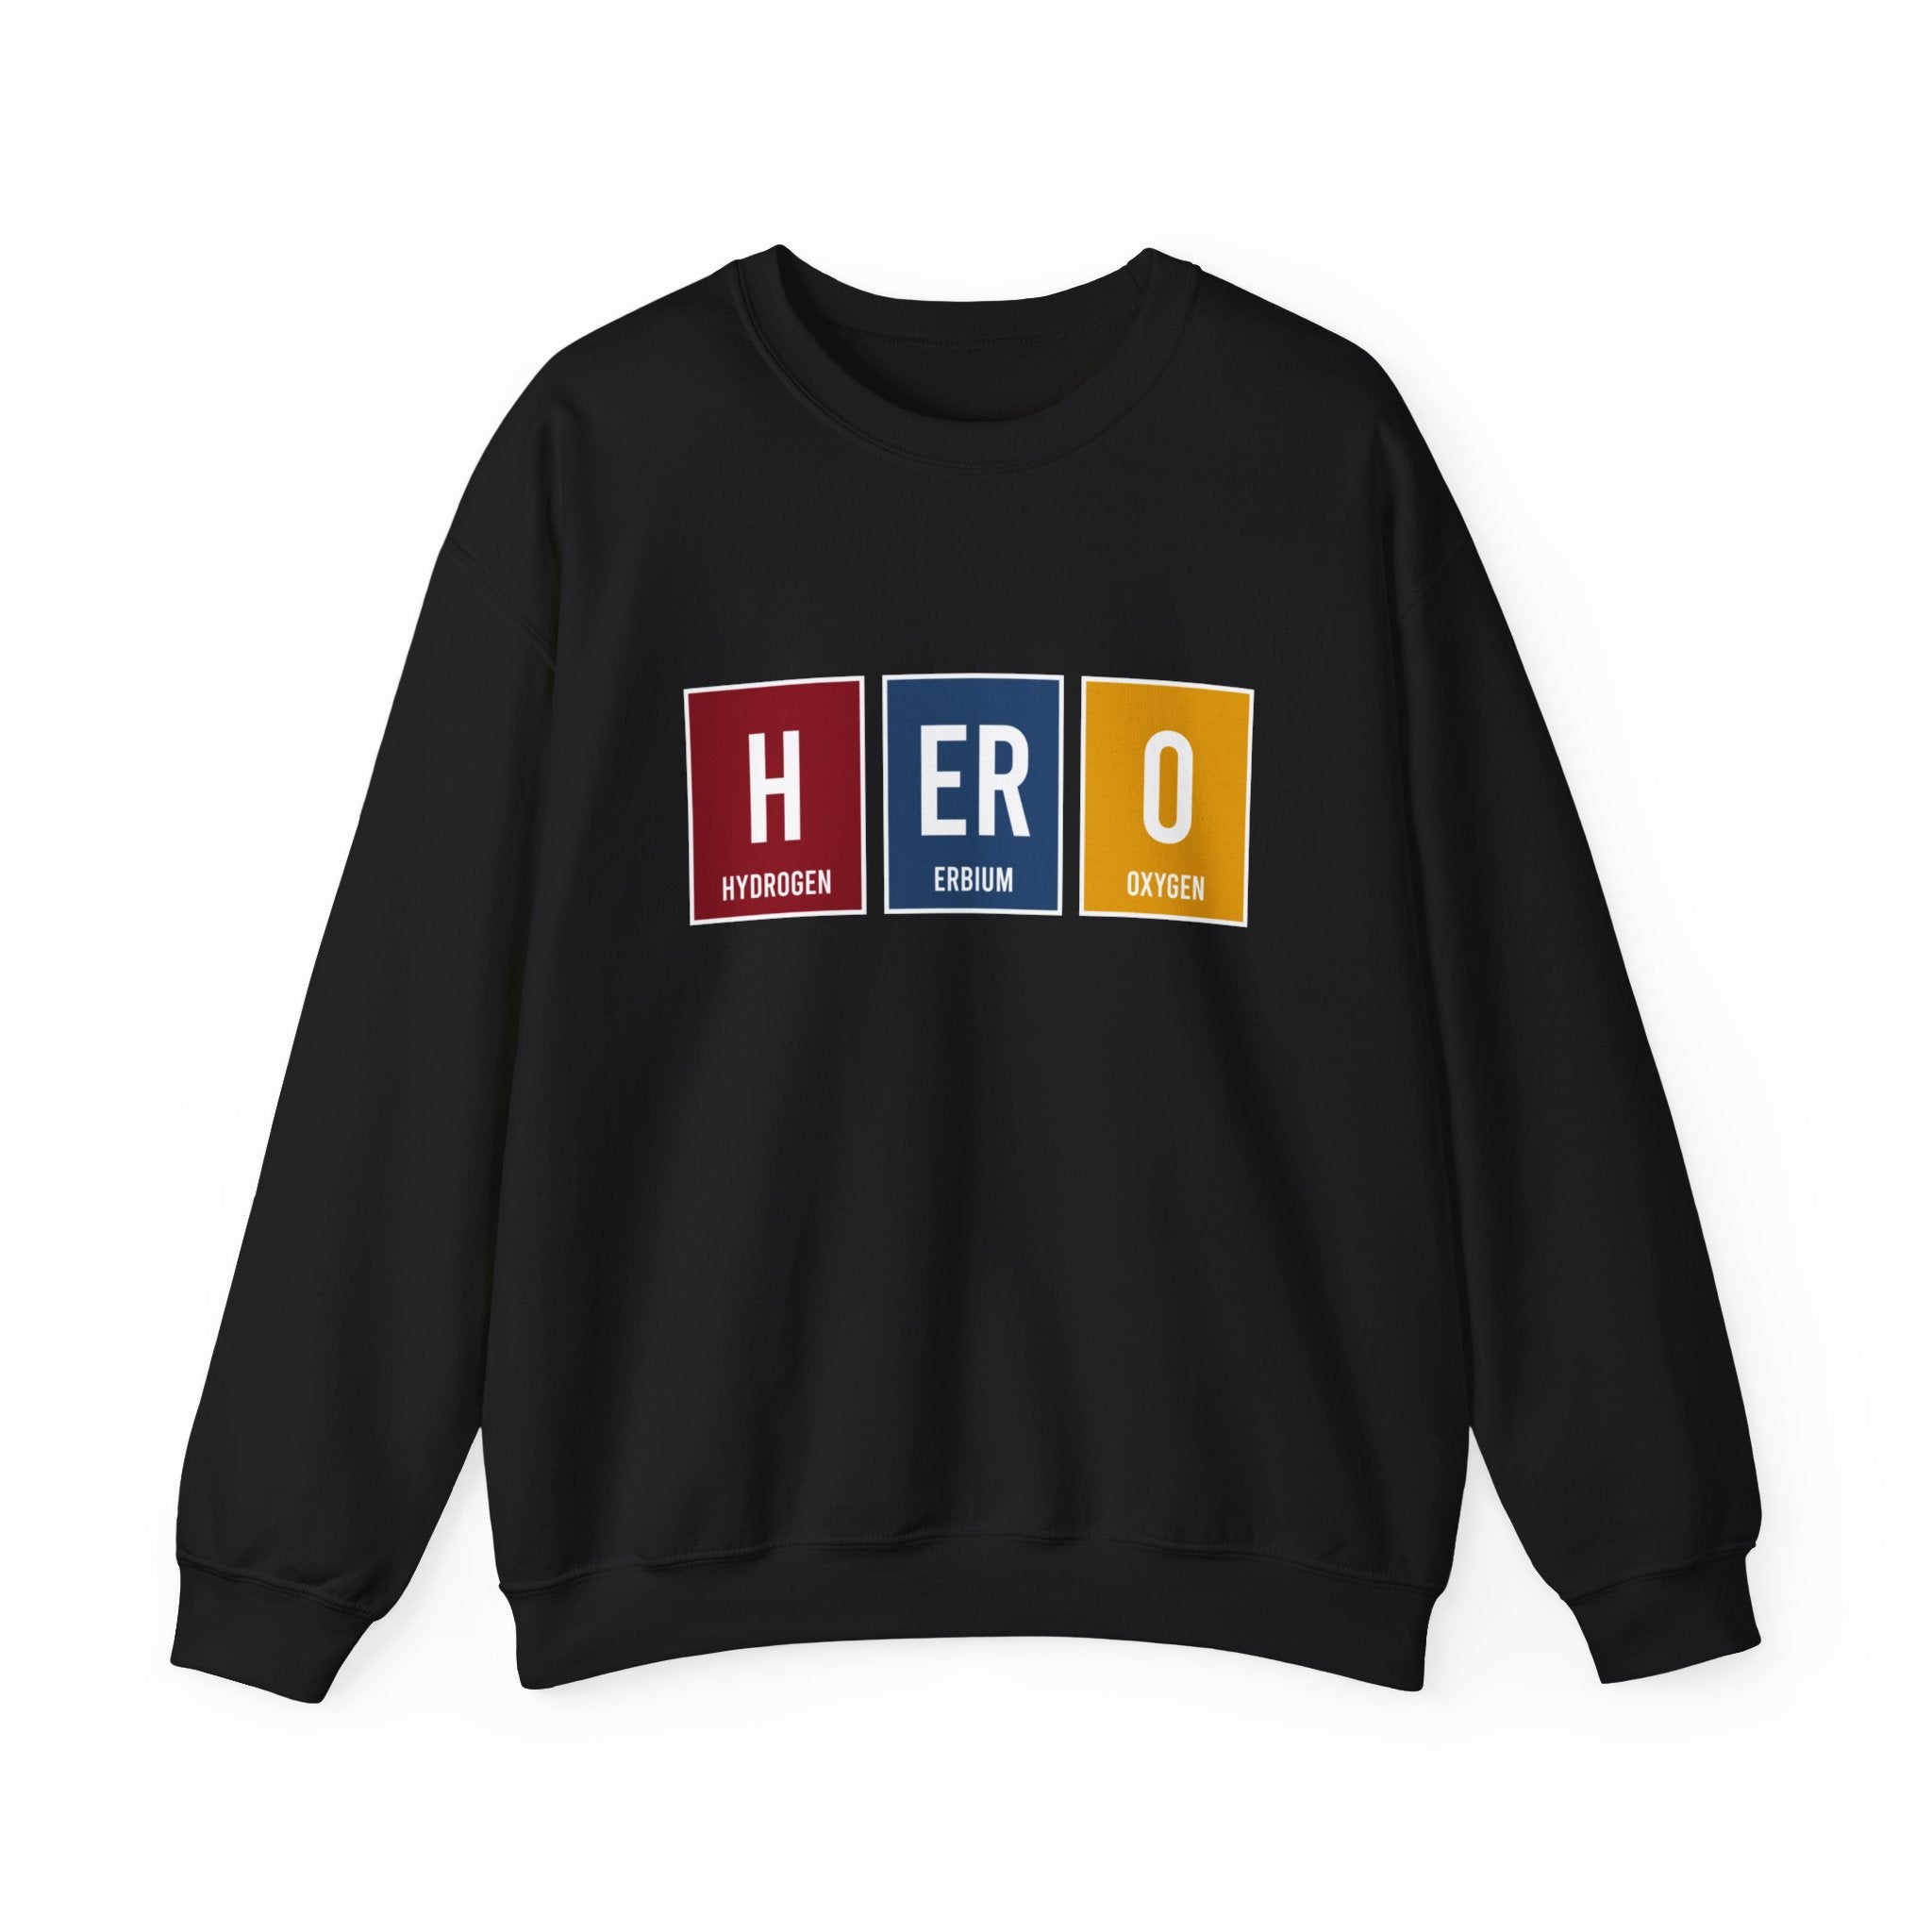 HERO - Sweatshirt displaying the word "HERO" with the elements Hydrogen (H), Erbium (Er), and Oxygen (O) in colored blocks on the front, combining comfort and style for those cold winter days.